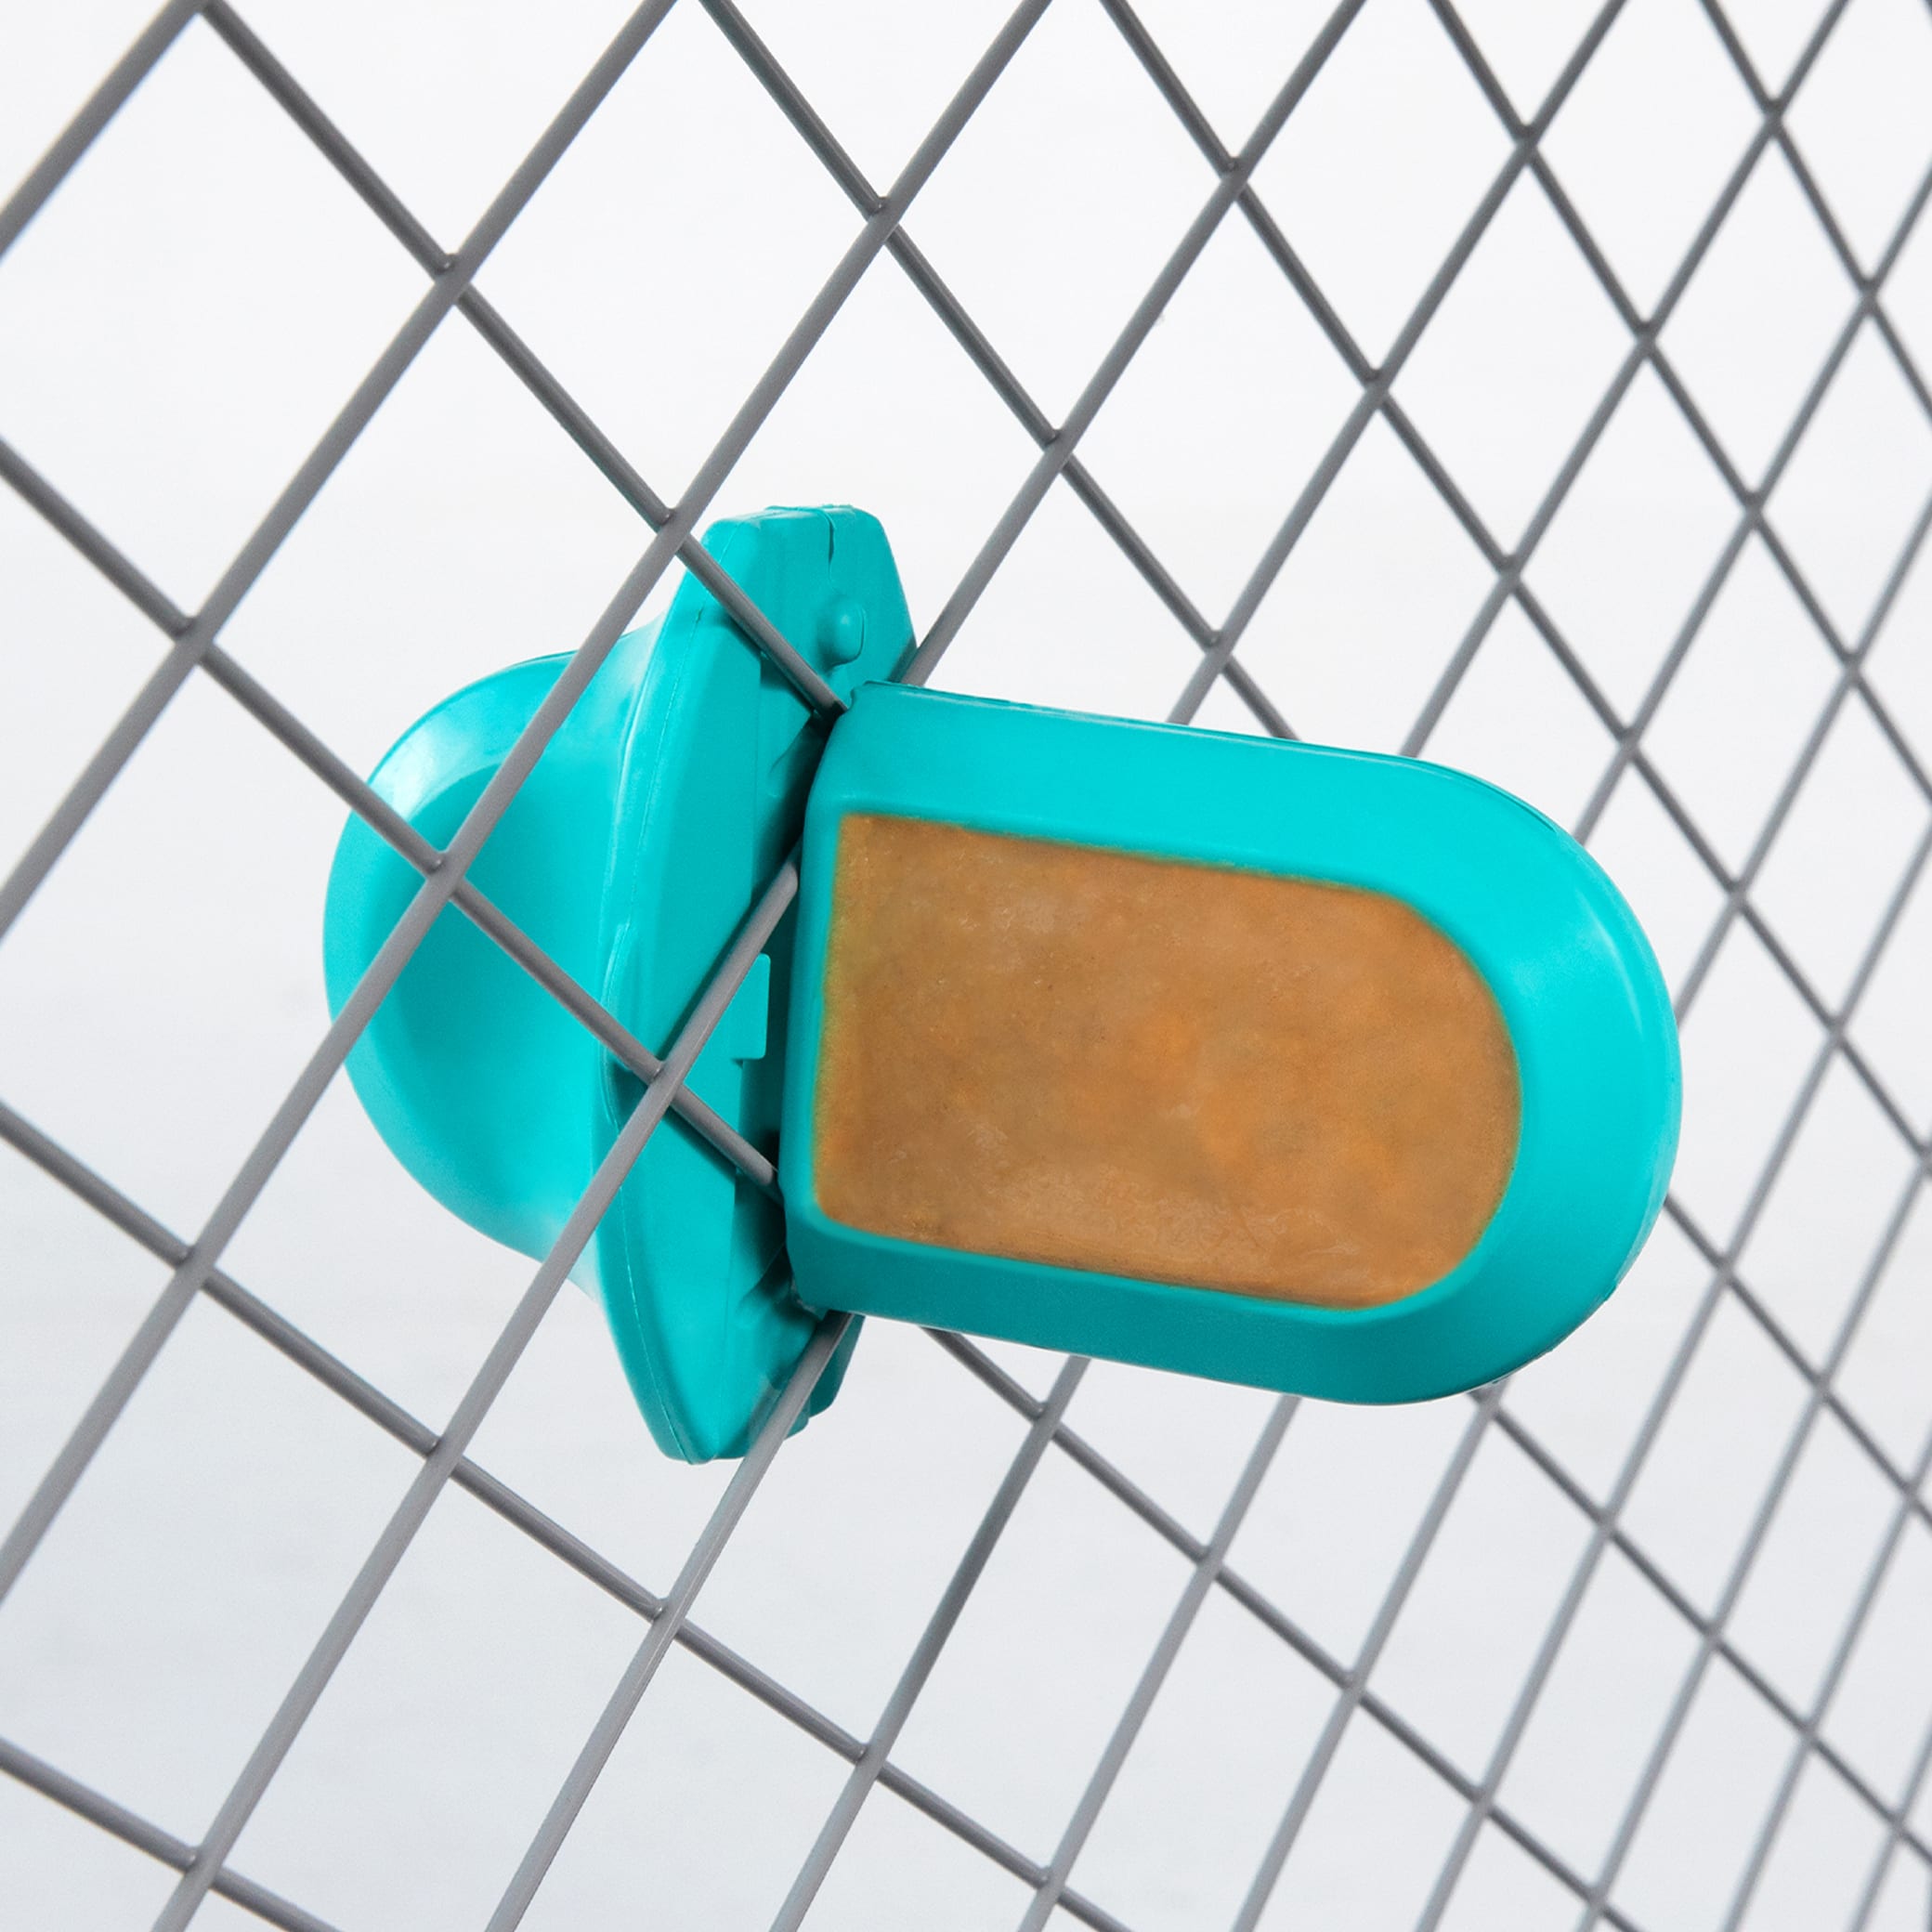 Diggs Groov Crate Training Aid - Turquoise